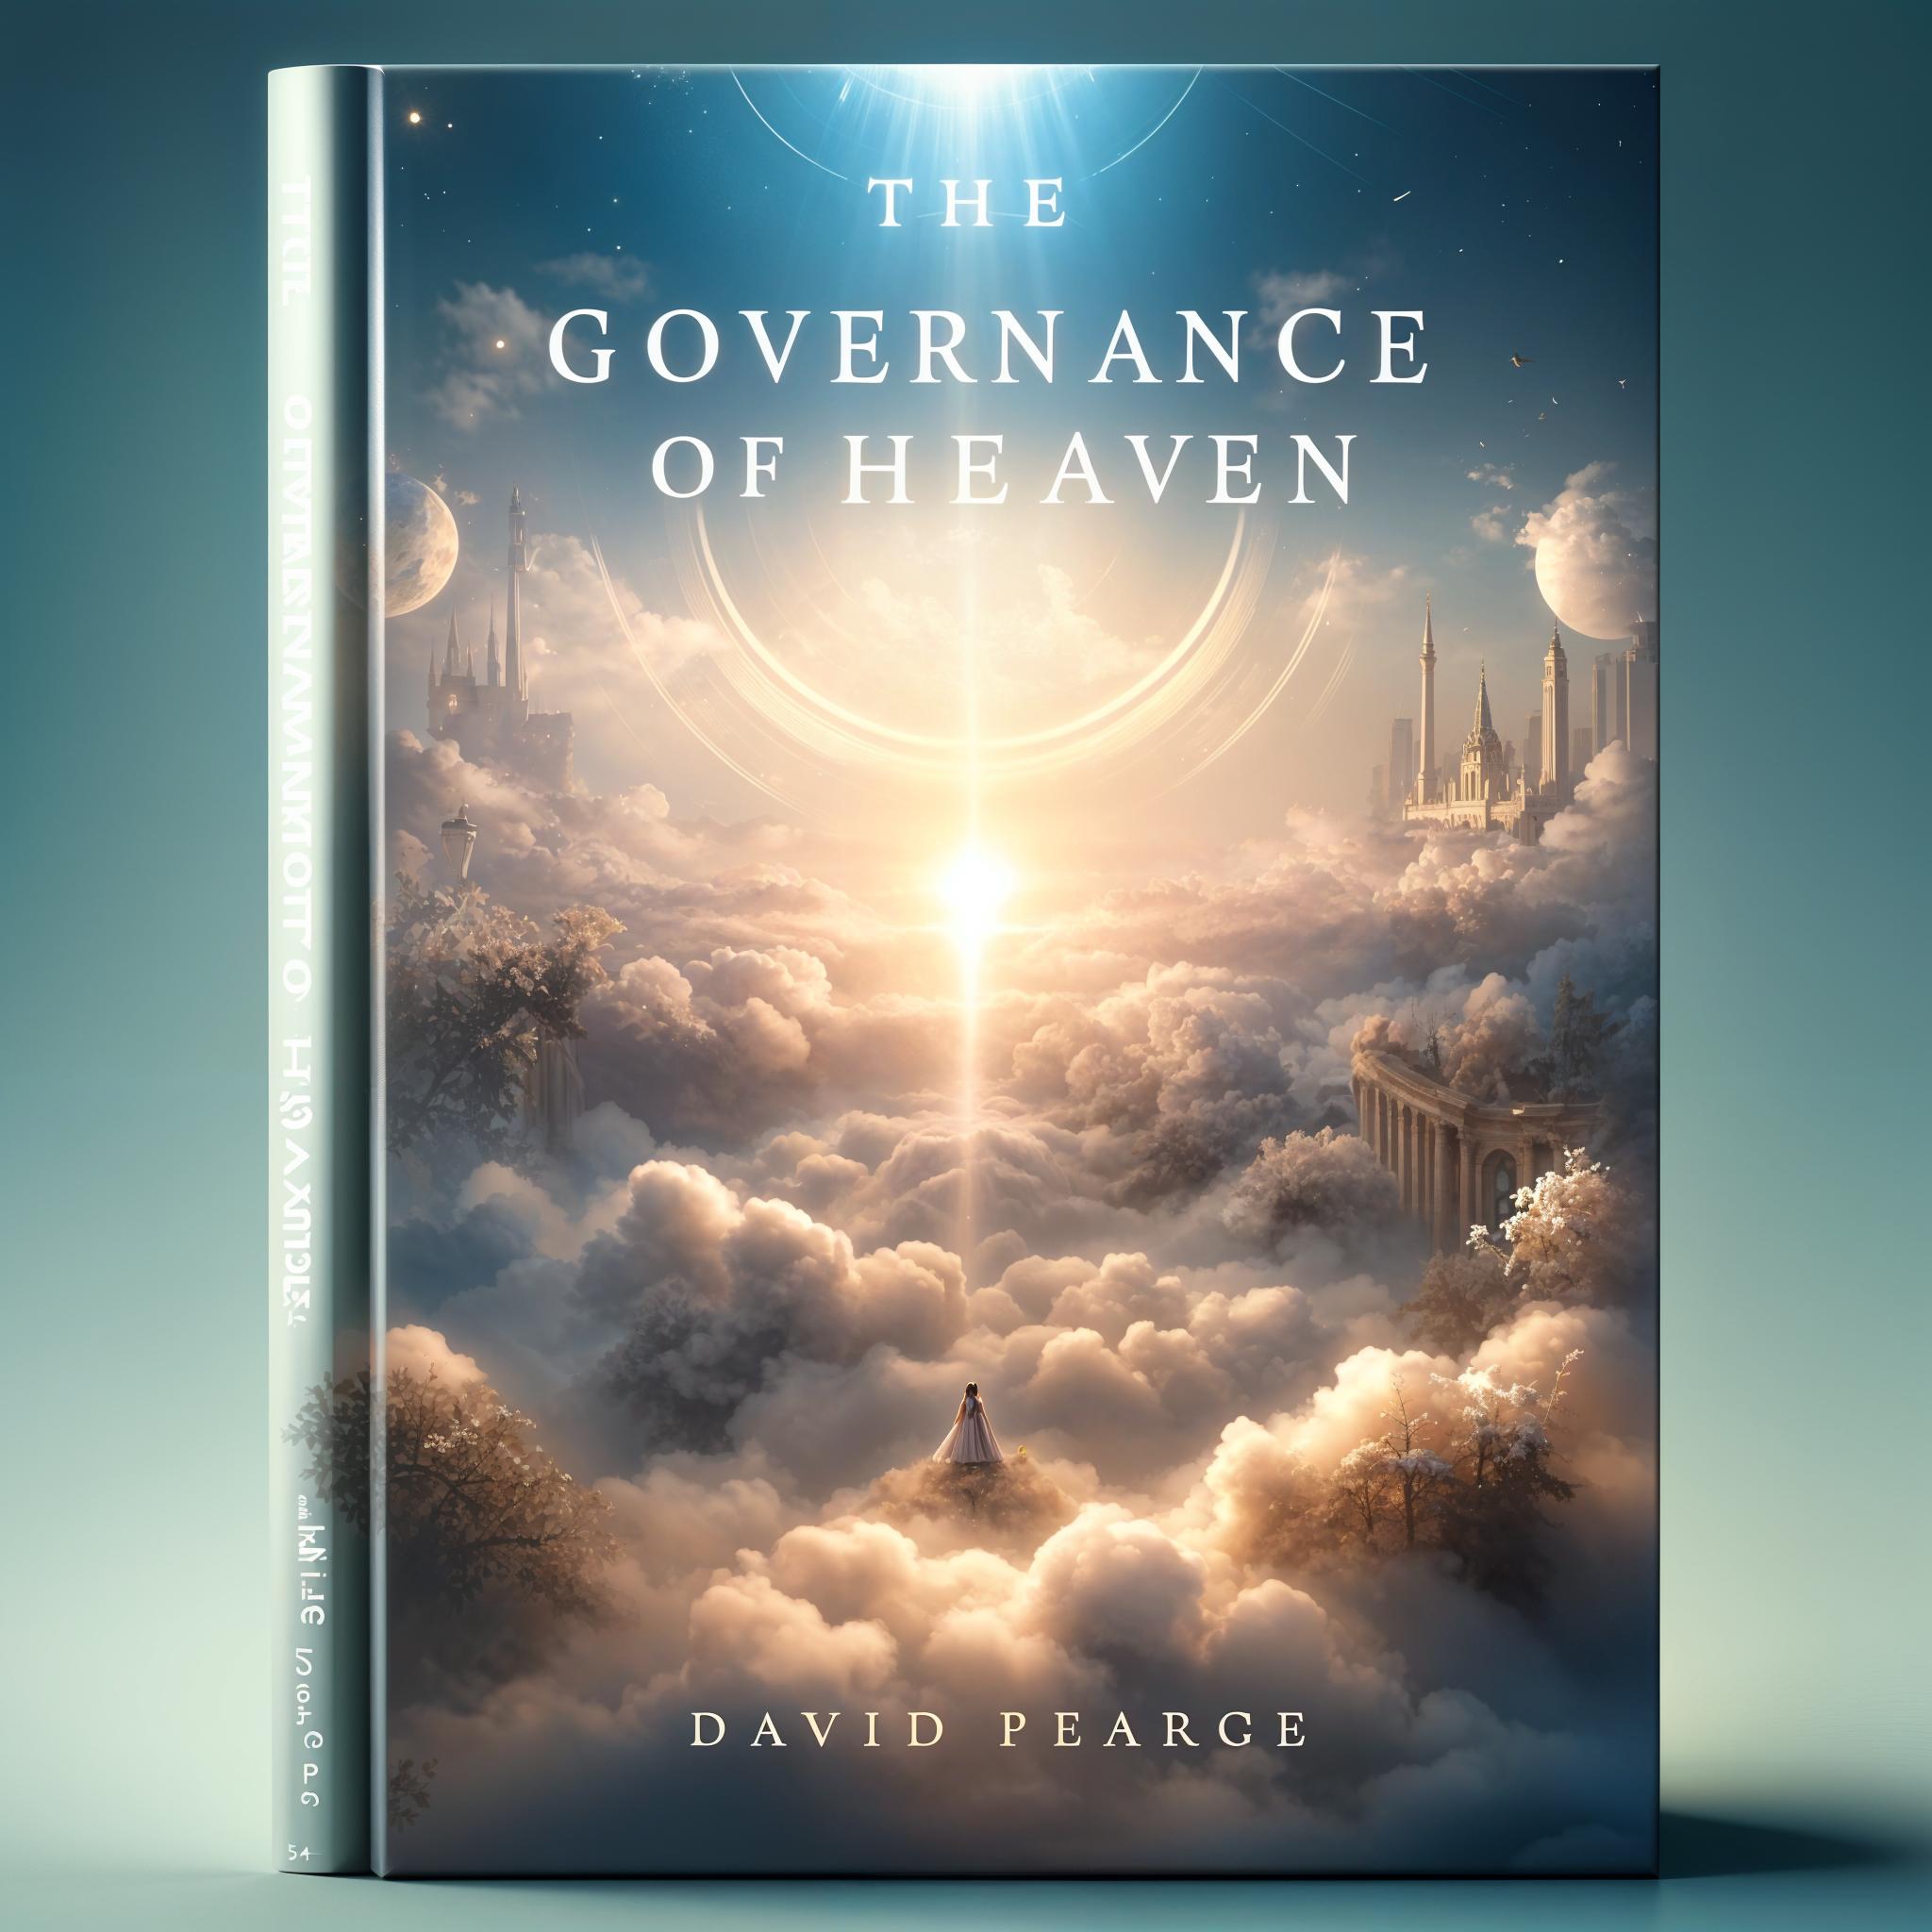 The Governance of Heaven by David Pearce